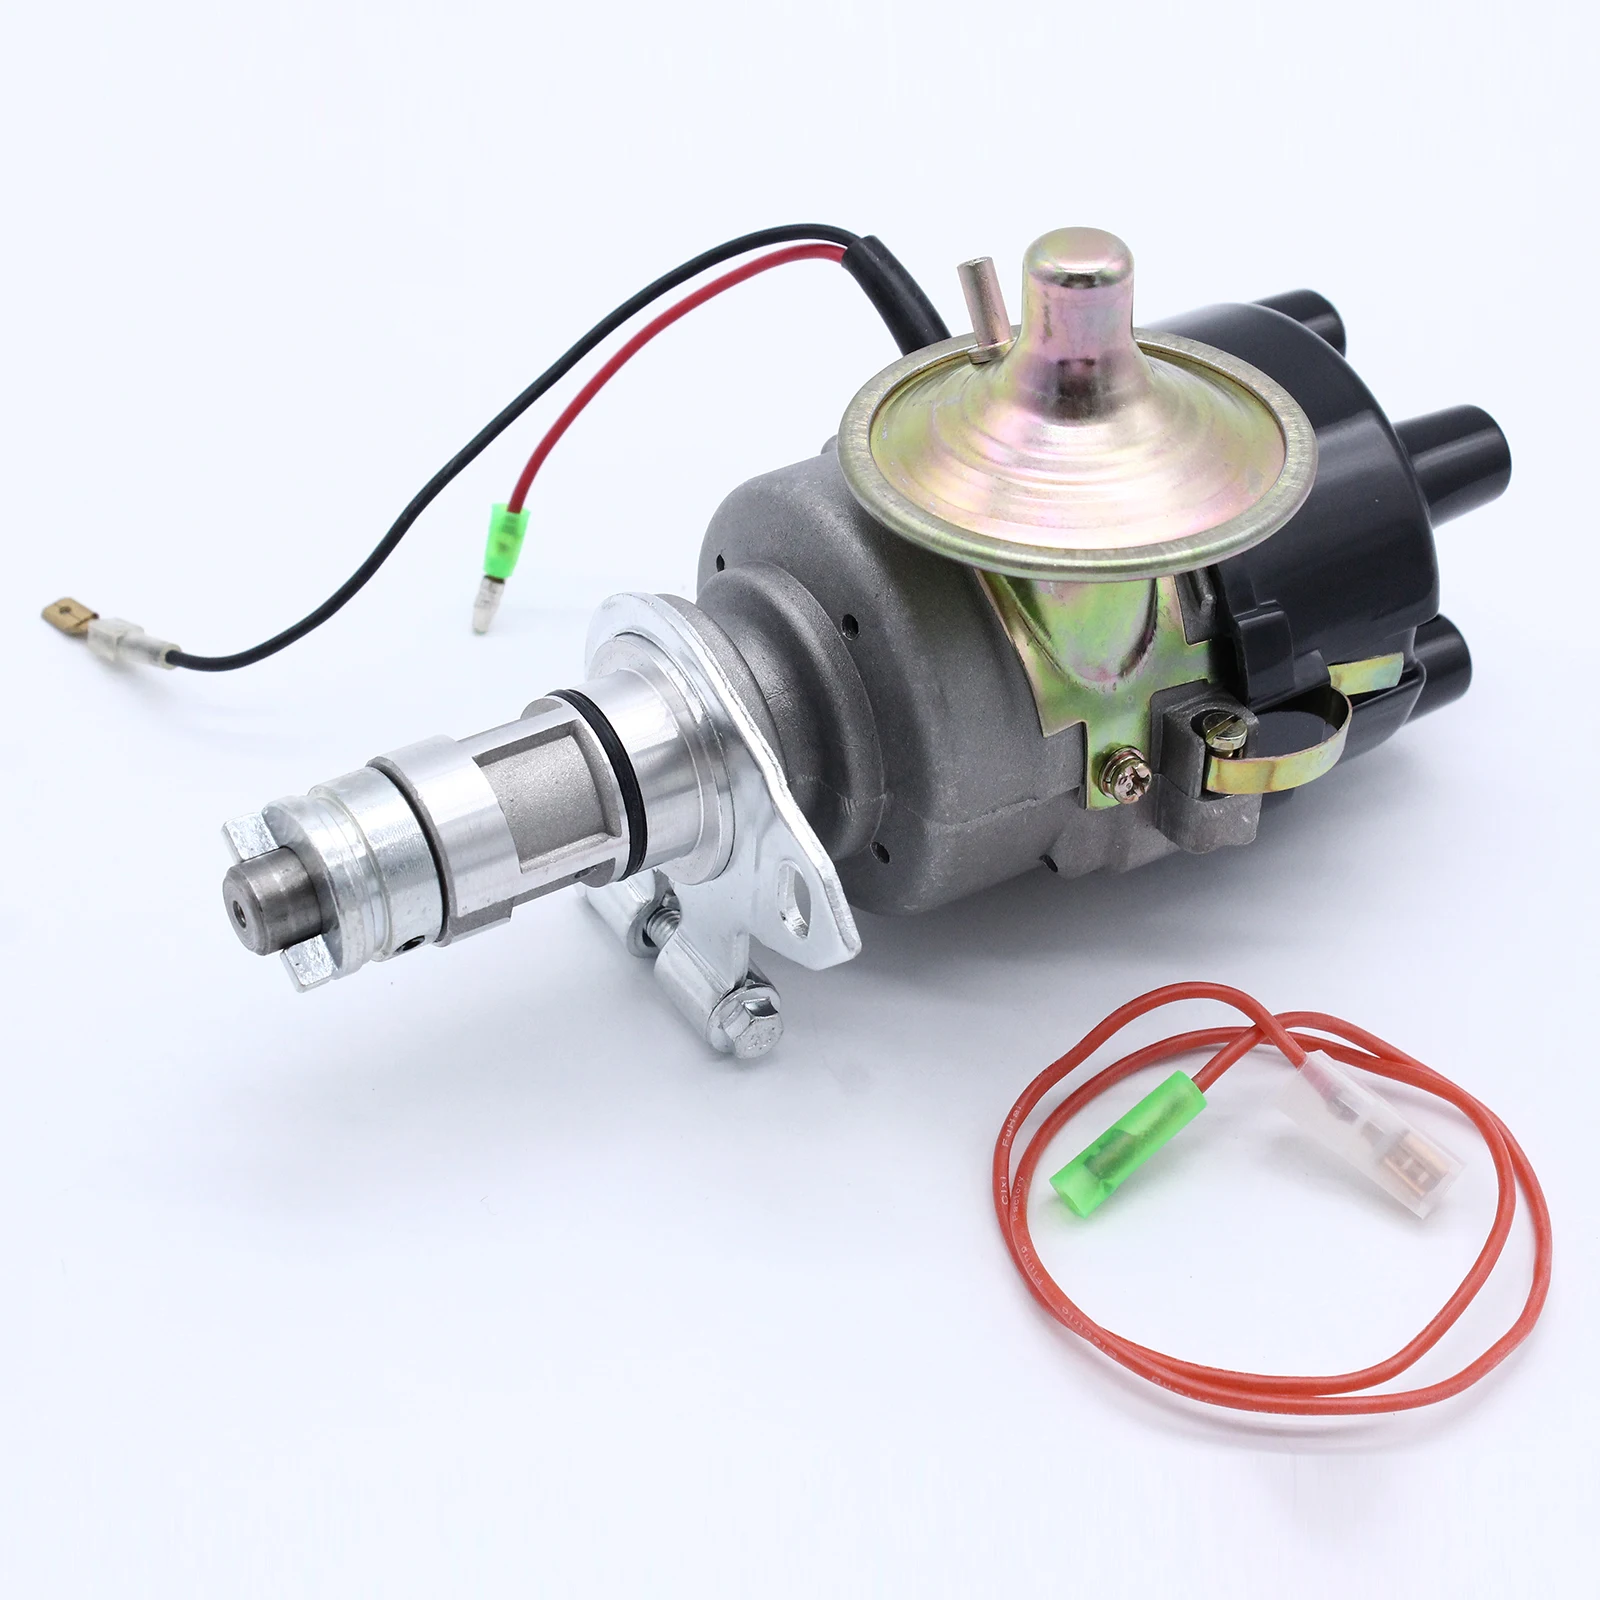 Alloy Car Electronic Distributor Replace Fits for Lucas 45D 25 